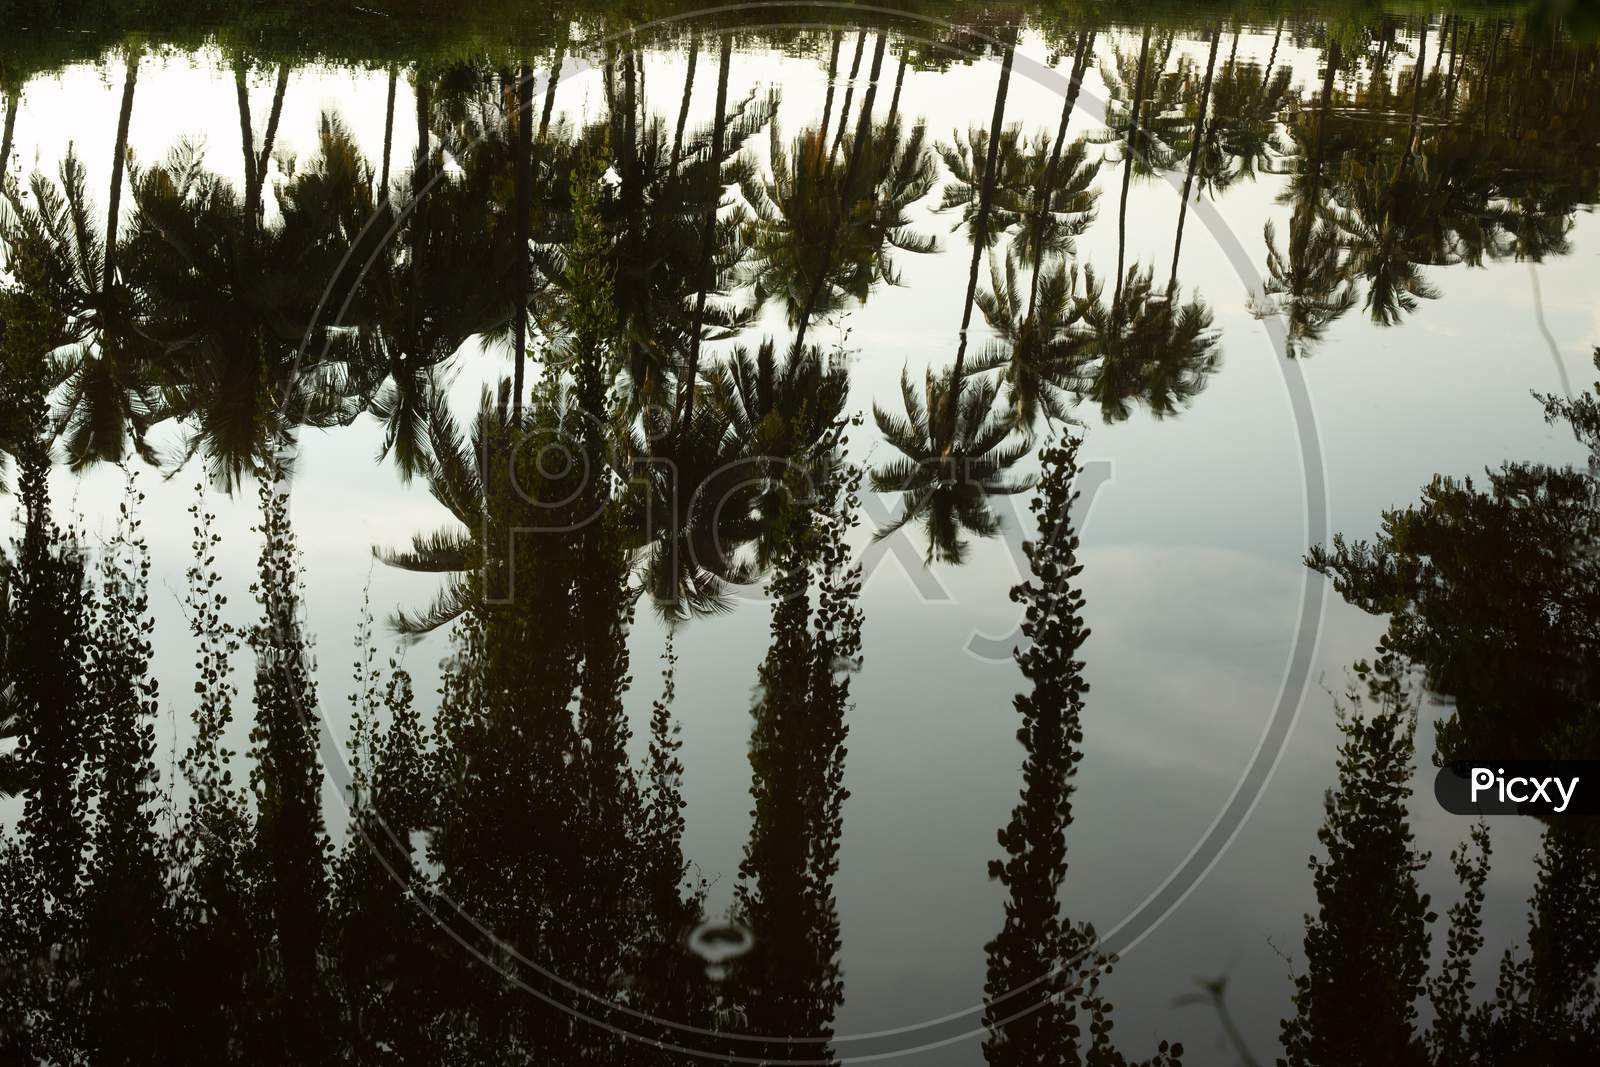 Reflection of coconut trees in the pond